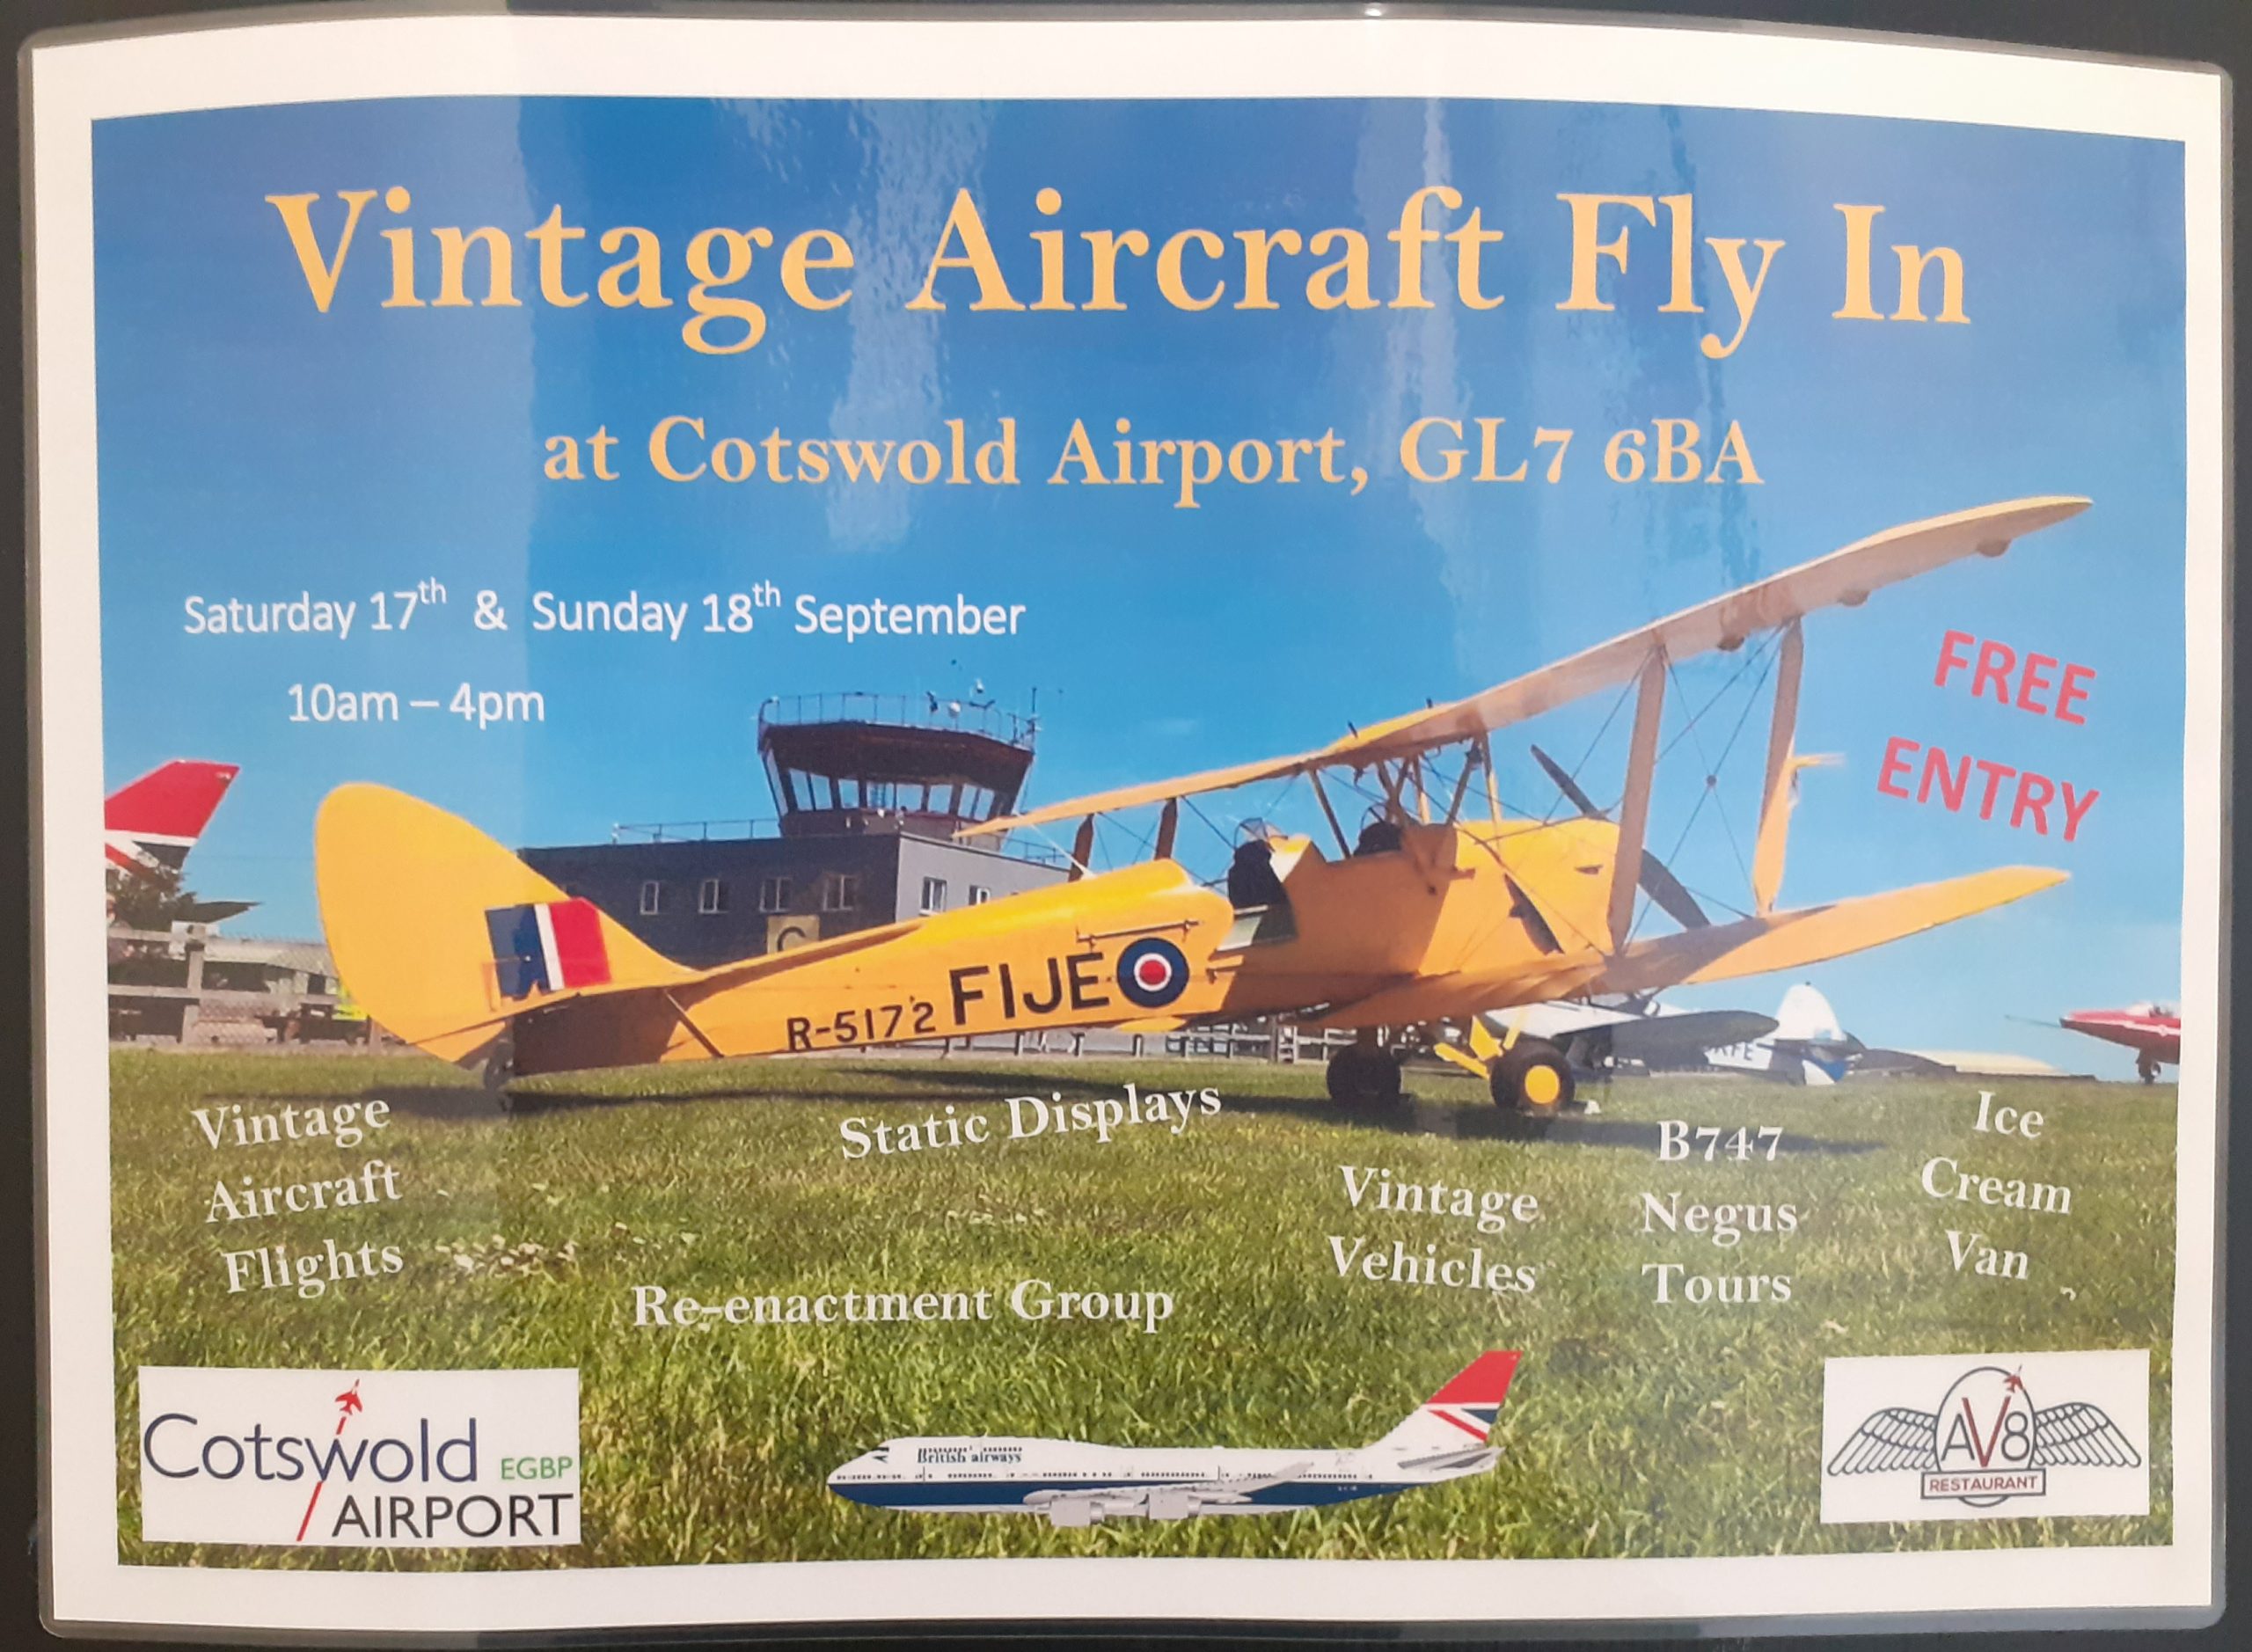 Vintage Aircraft Fly In